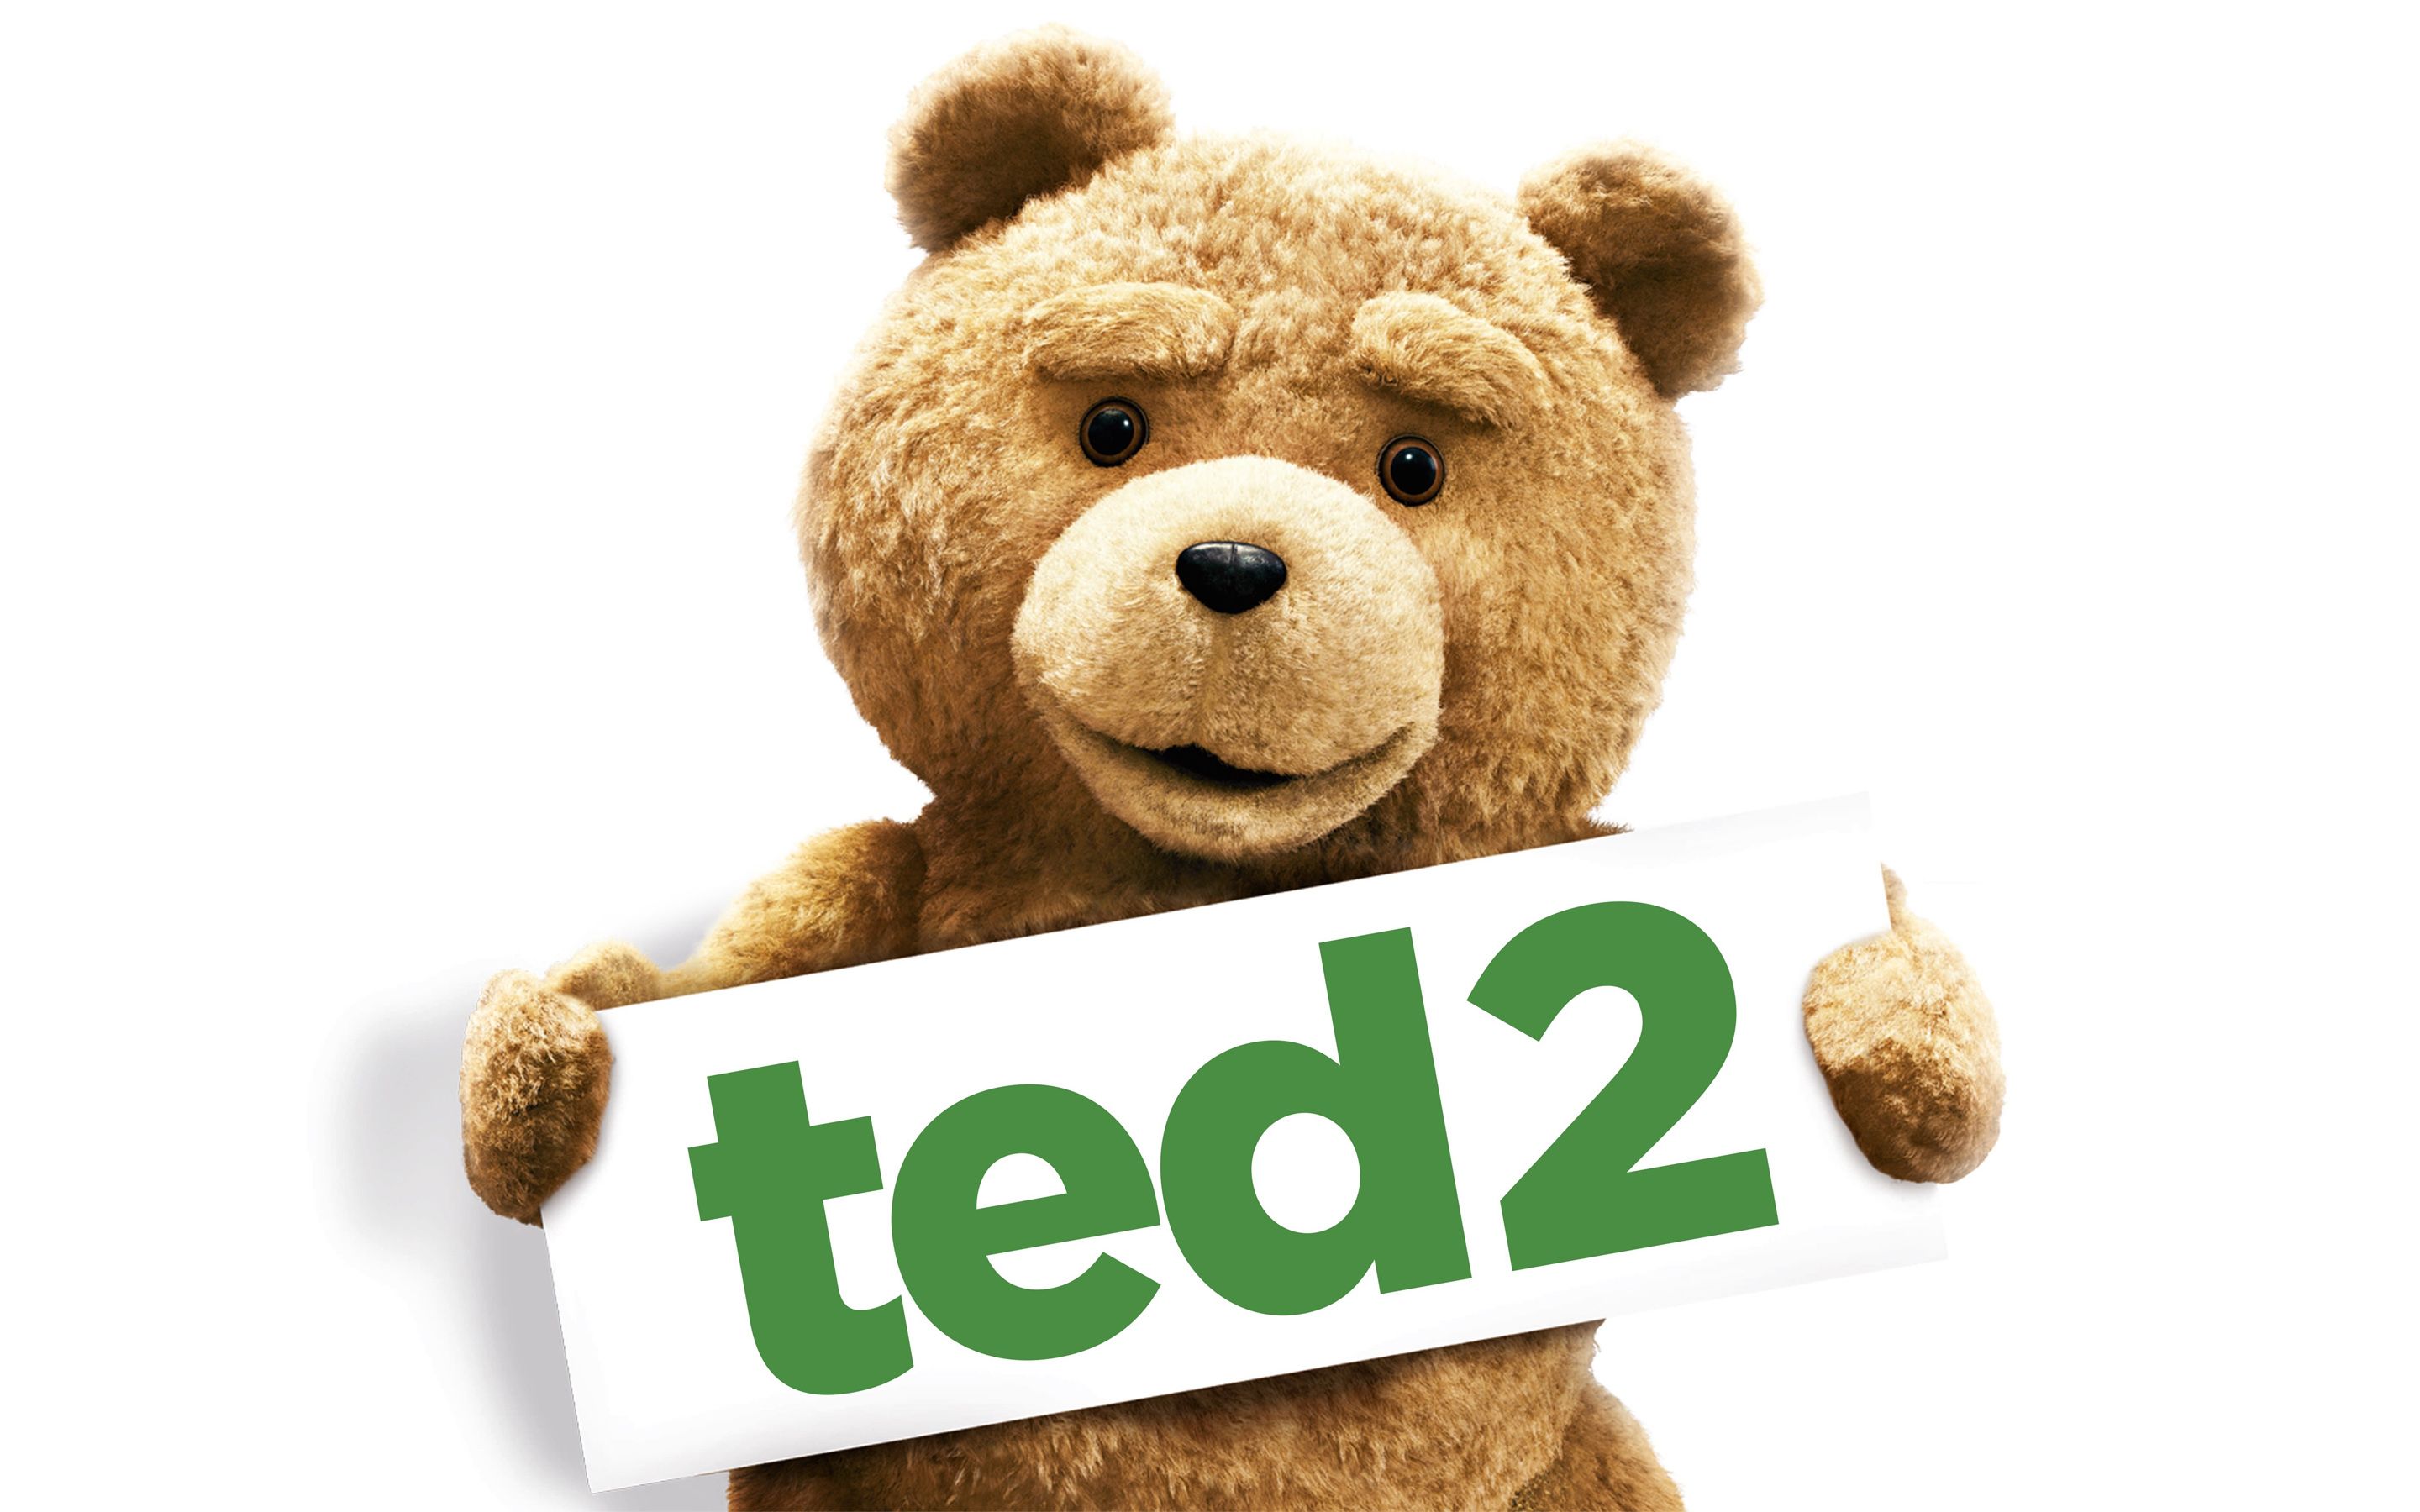 Ted 2 Movie Poster, HD Movies, 4k Wallpaper, Image, Background, Photo and Picture